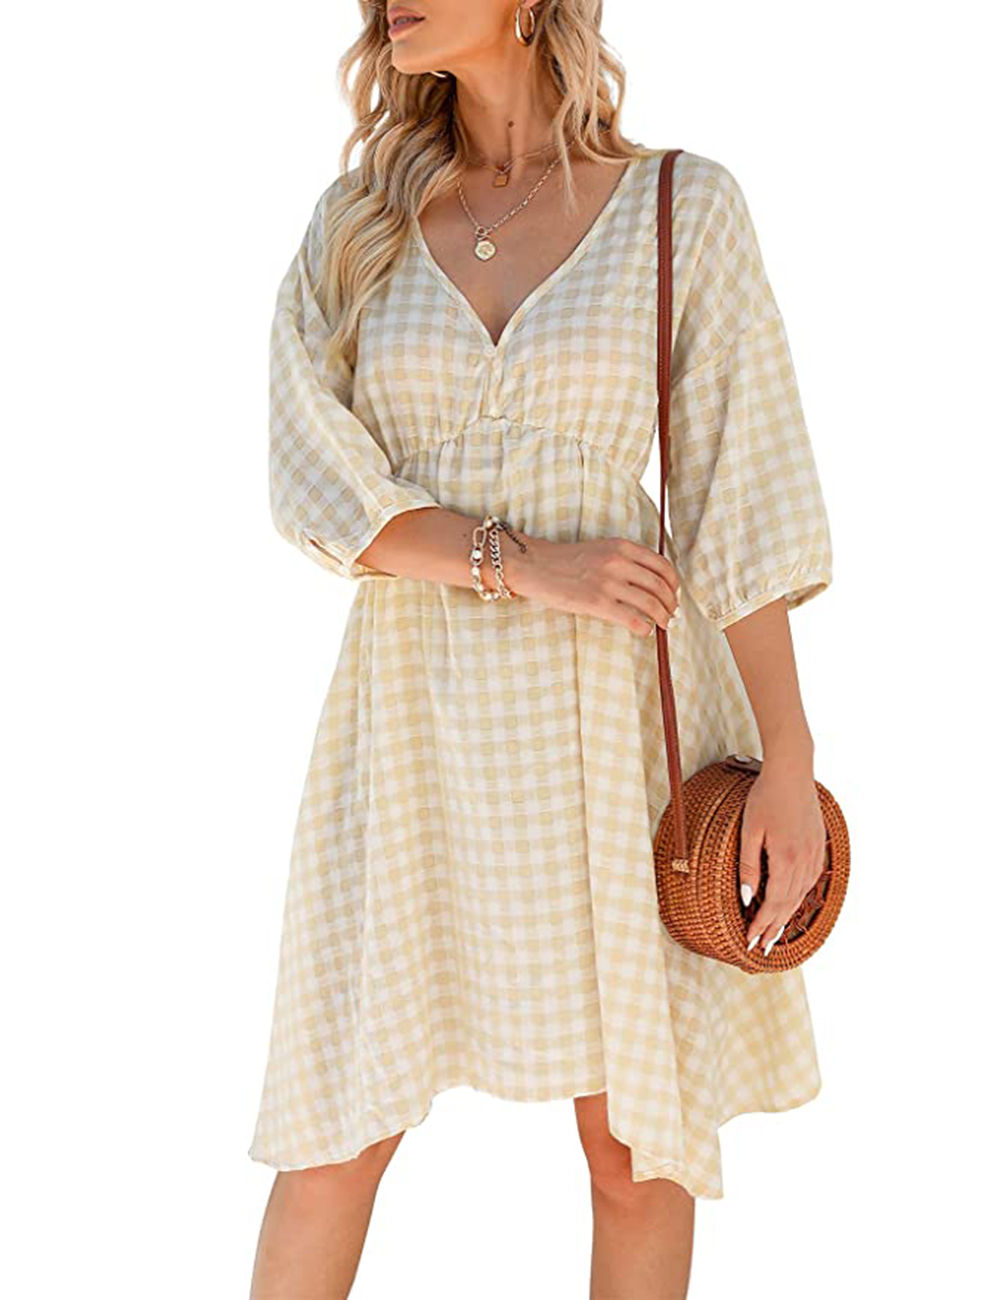 Get Ready for Fall Fashion With This Transitional Gingham Midi Dress ...